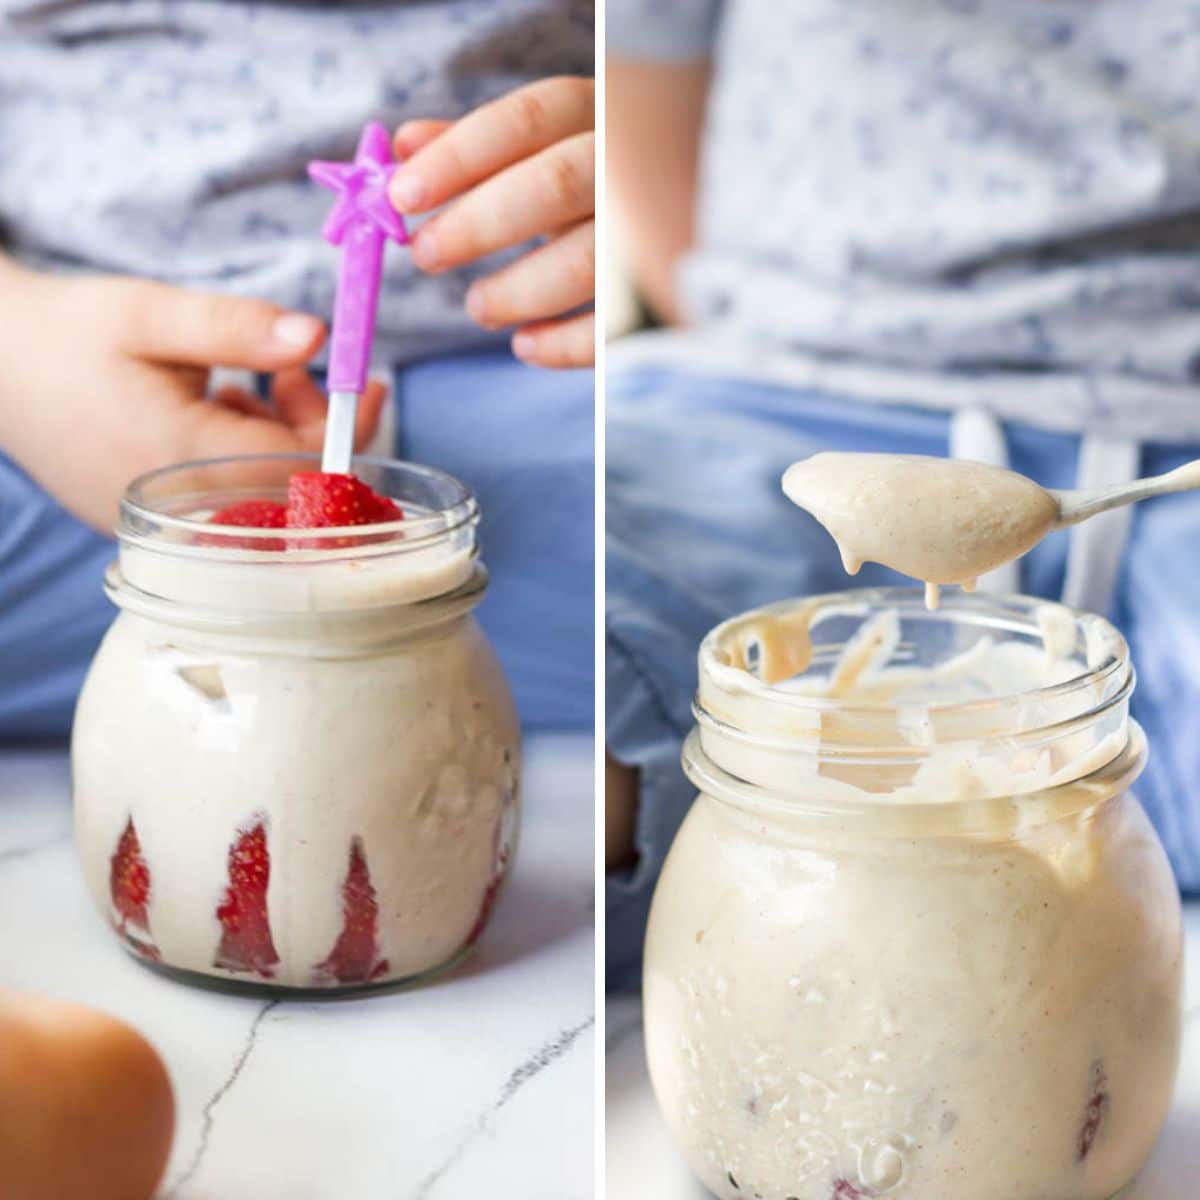 Collage of Two Images. 1) Child Reaching for Spoon in Glass Jar of Banana Puree Topped with Strawberries 2)Close Up of Spoonful of Banana Yogurt above Glass Jar.